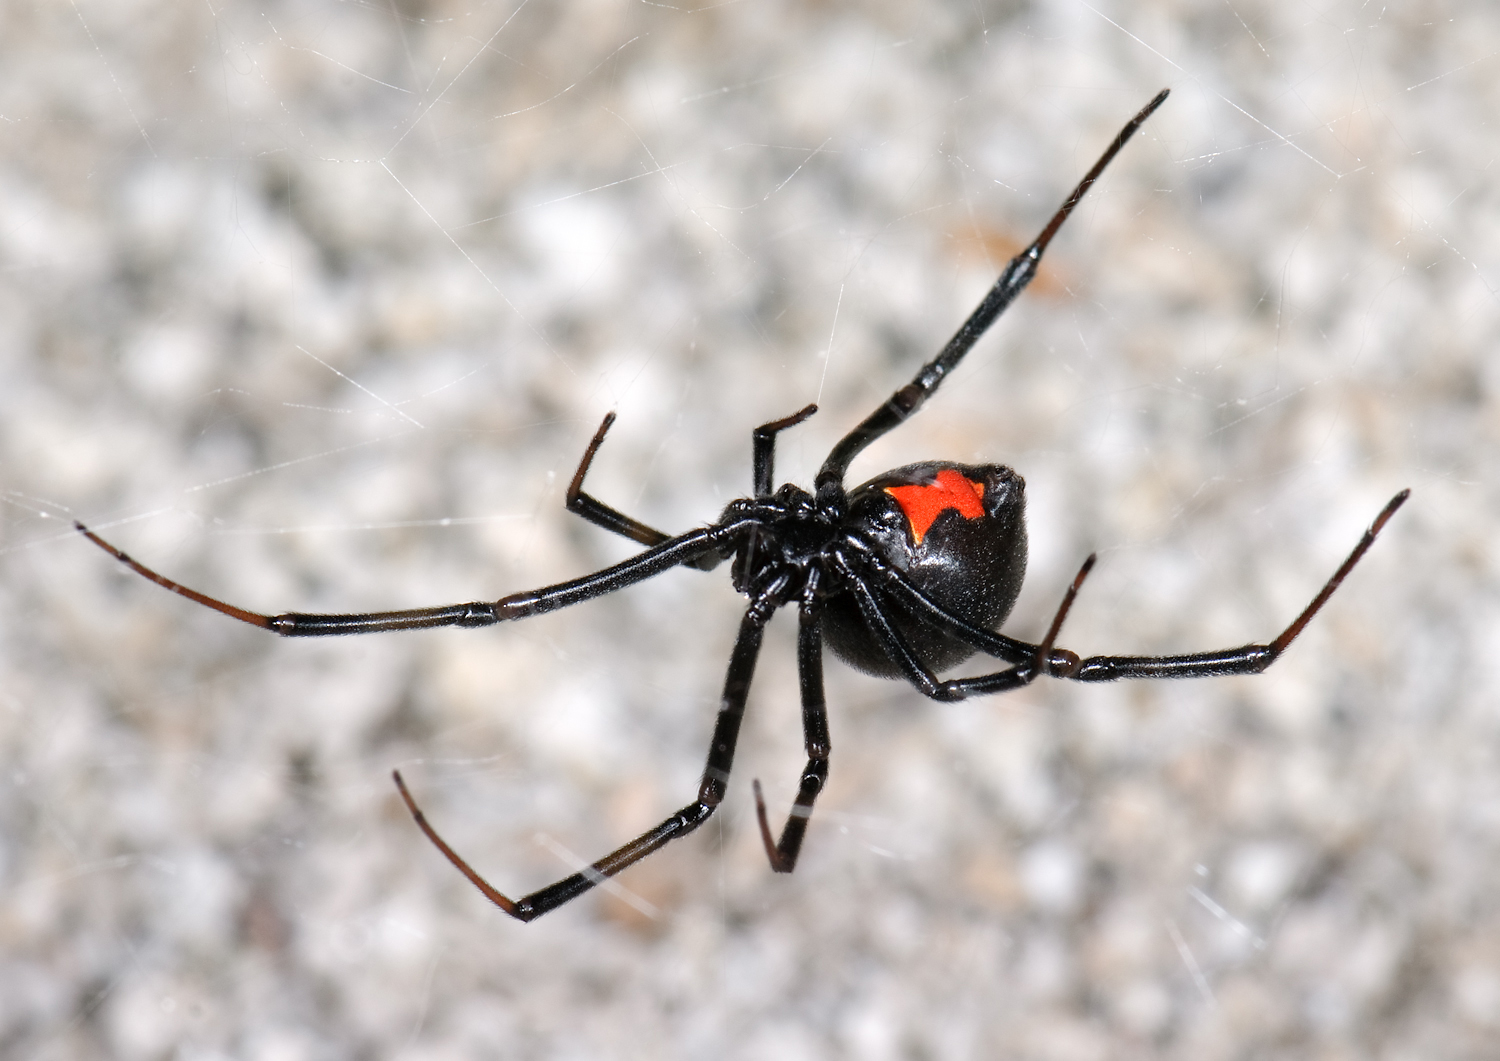 Which one of these spiders is a black widow?